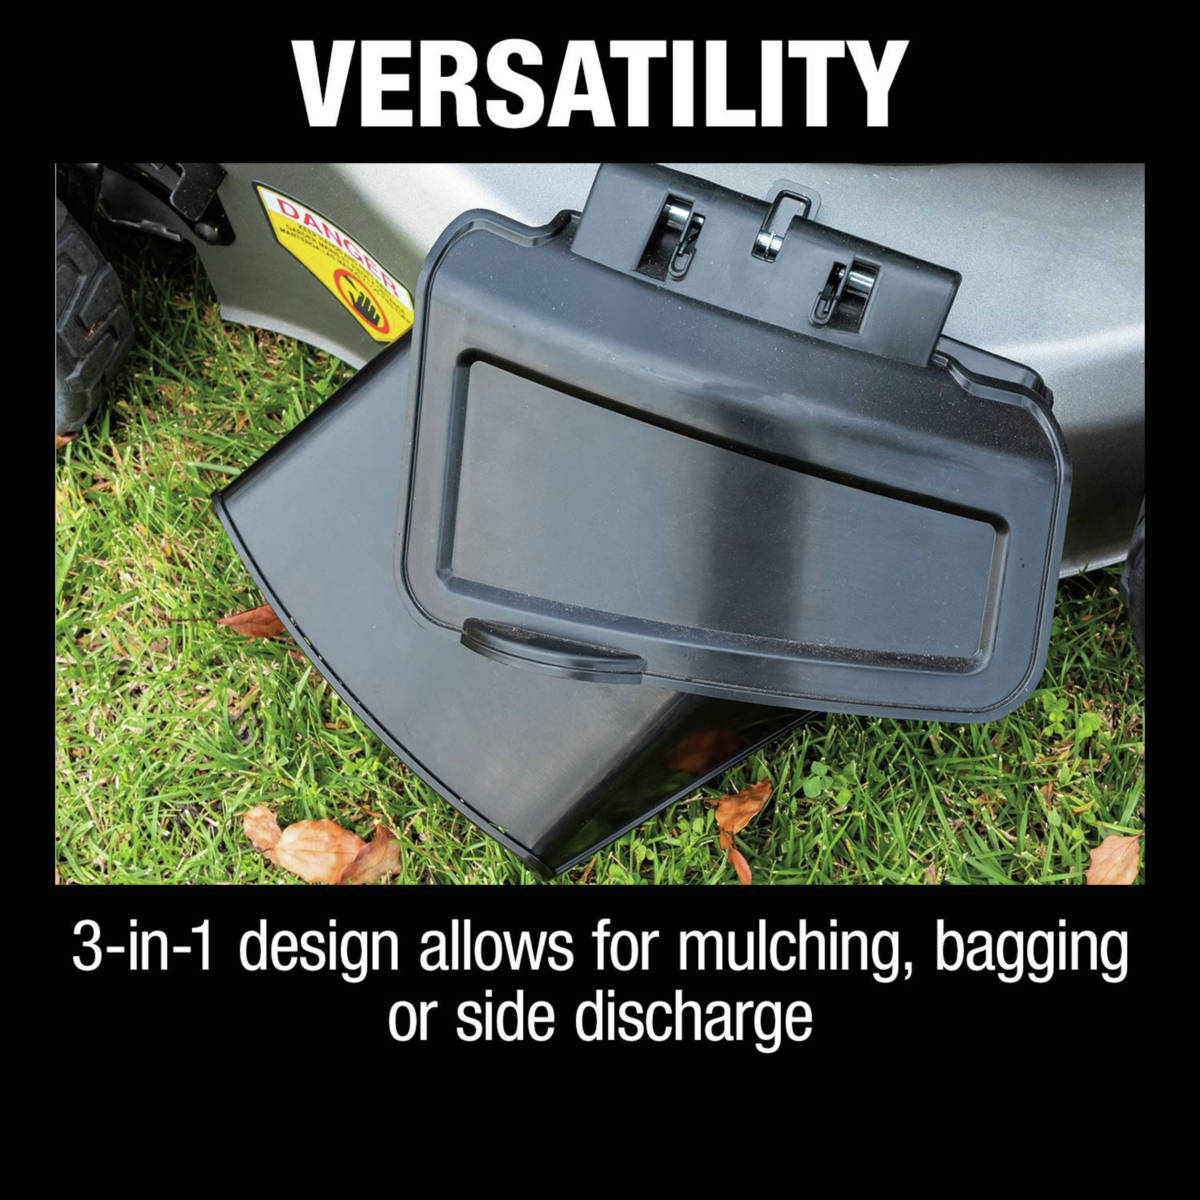 18V X2 (36V) LXT Lawn Mower 3-in-1 design allows for mulching, bagging or side discharge 